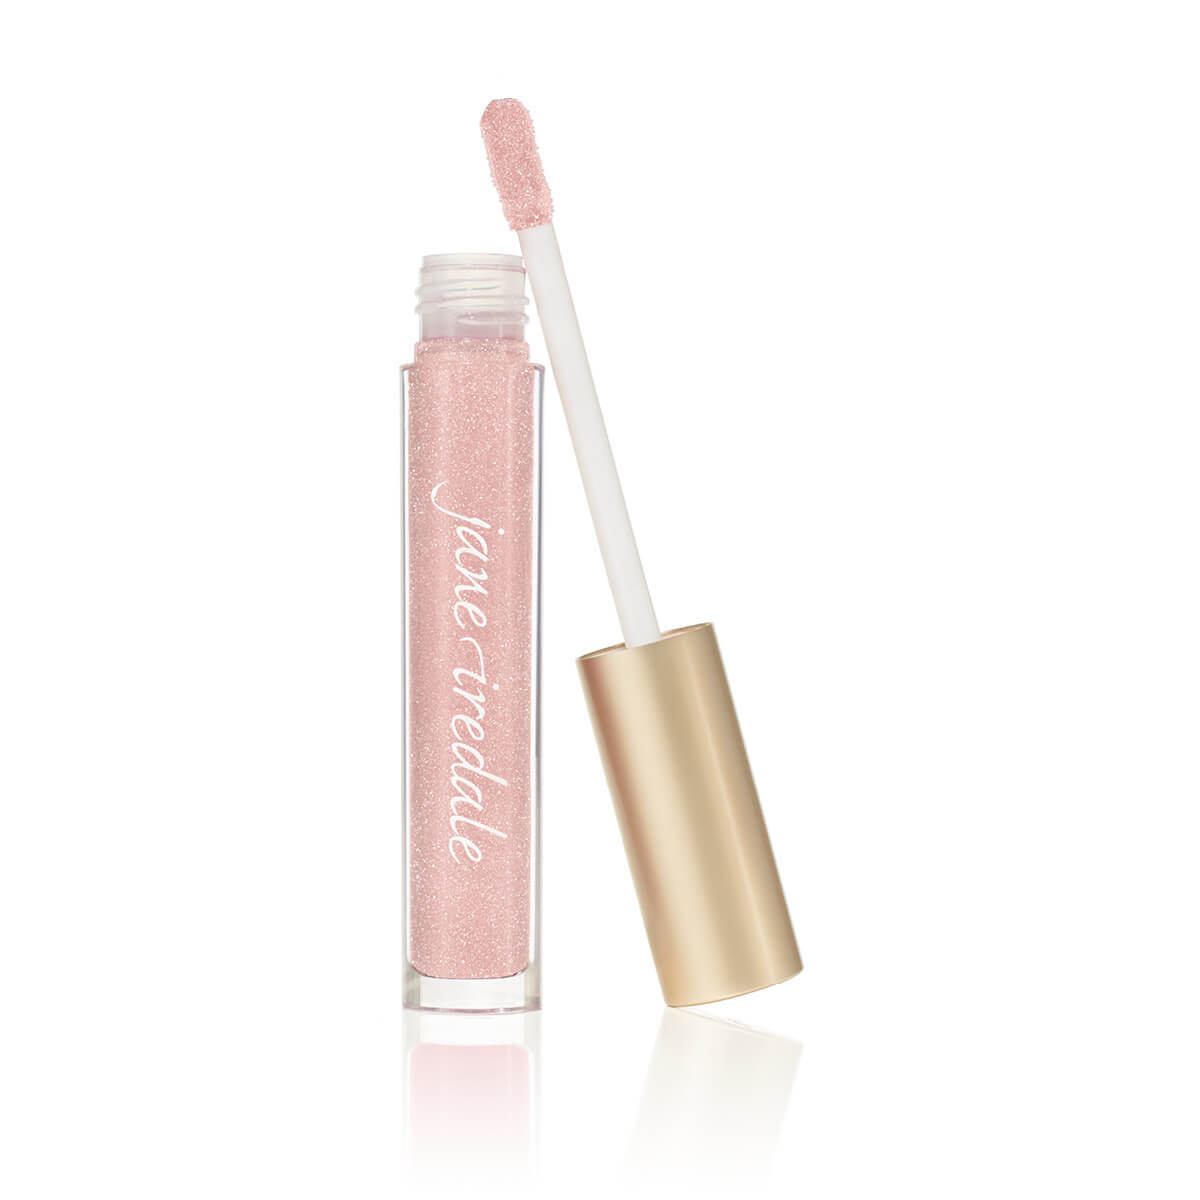 Billede af Jane Iredale HydroPure Hyaluronic Lip Gloss Snow Berry - 3.75 ml.